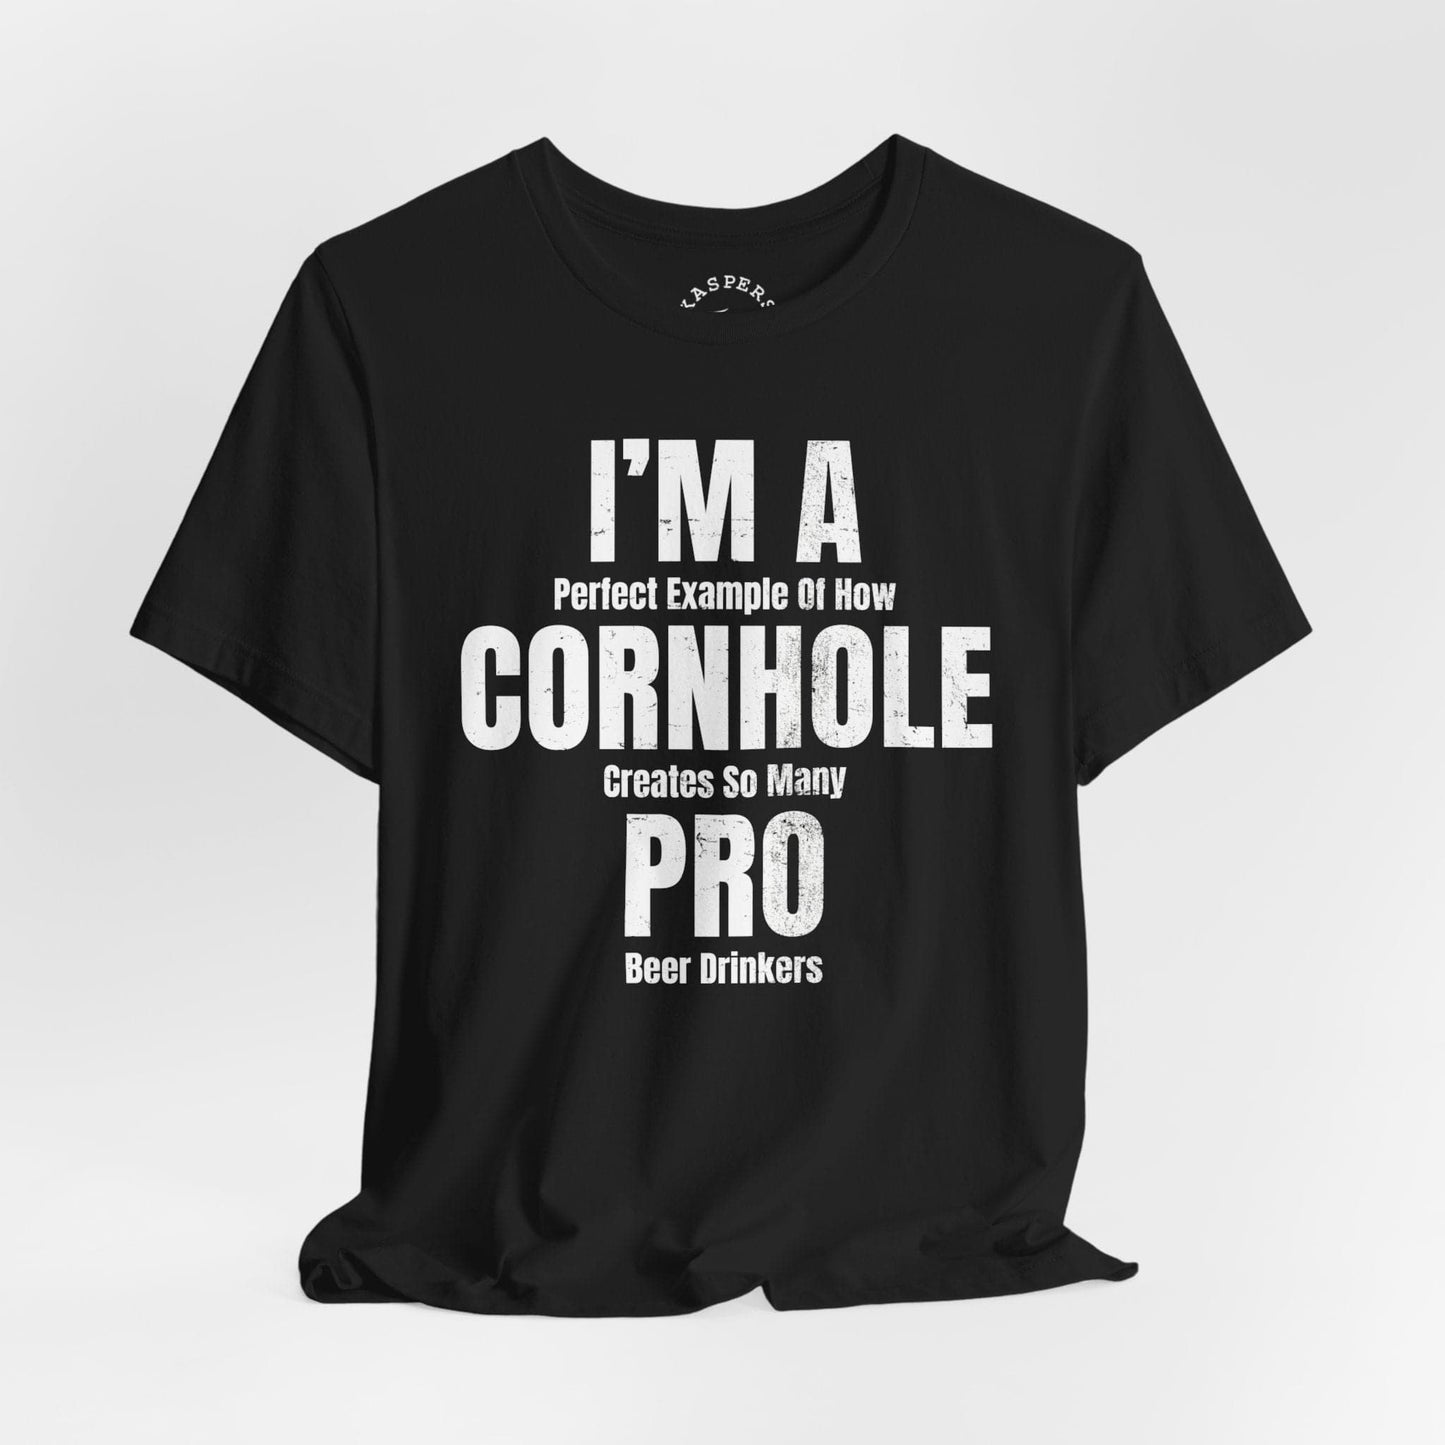 I'm A Perfect Example Of How Cornhole Creates Pro Beer Drinkers T-Shirt